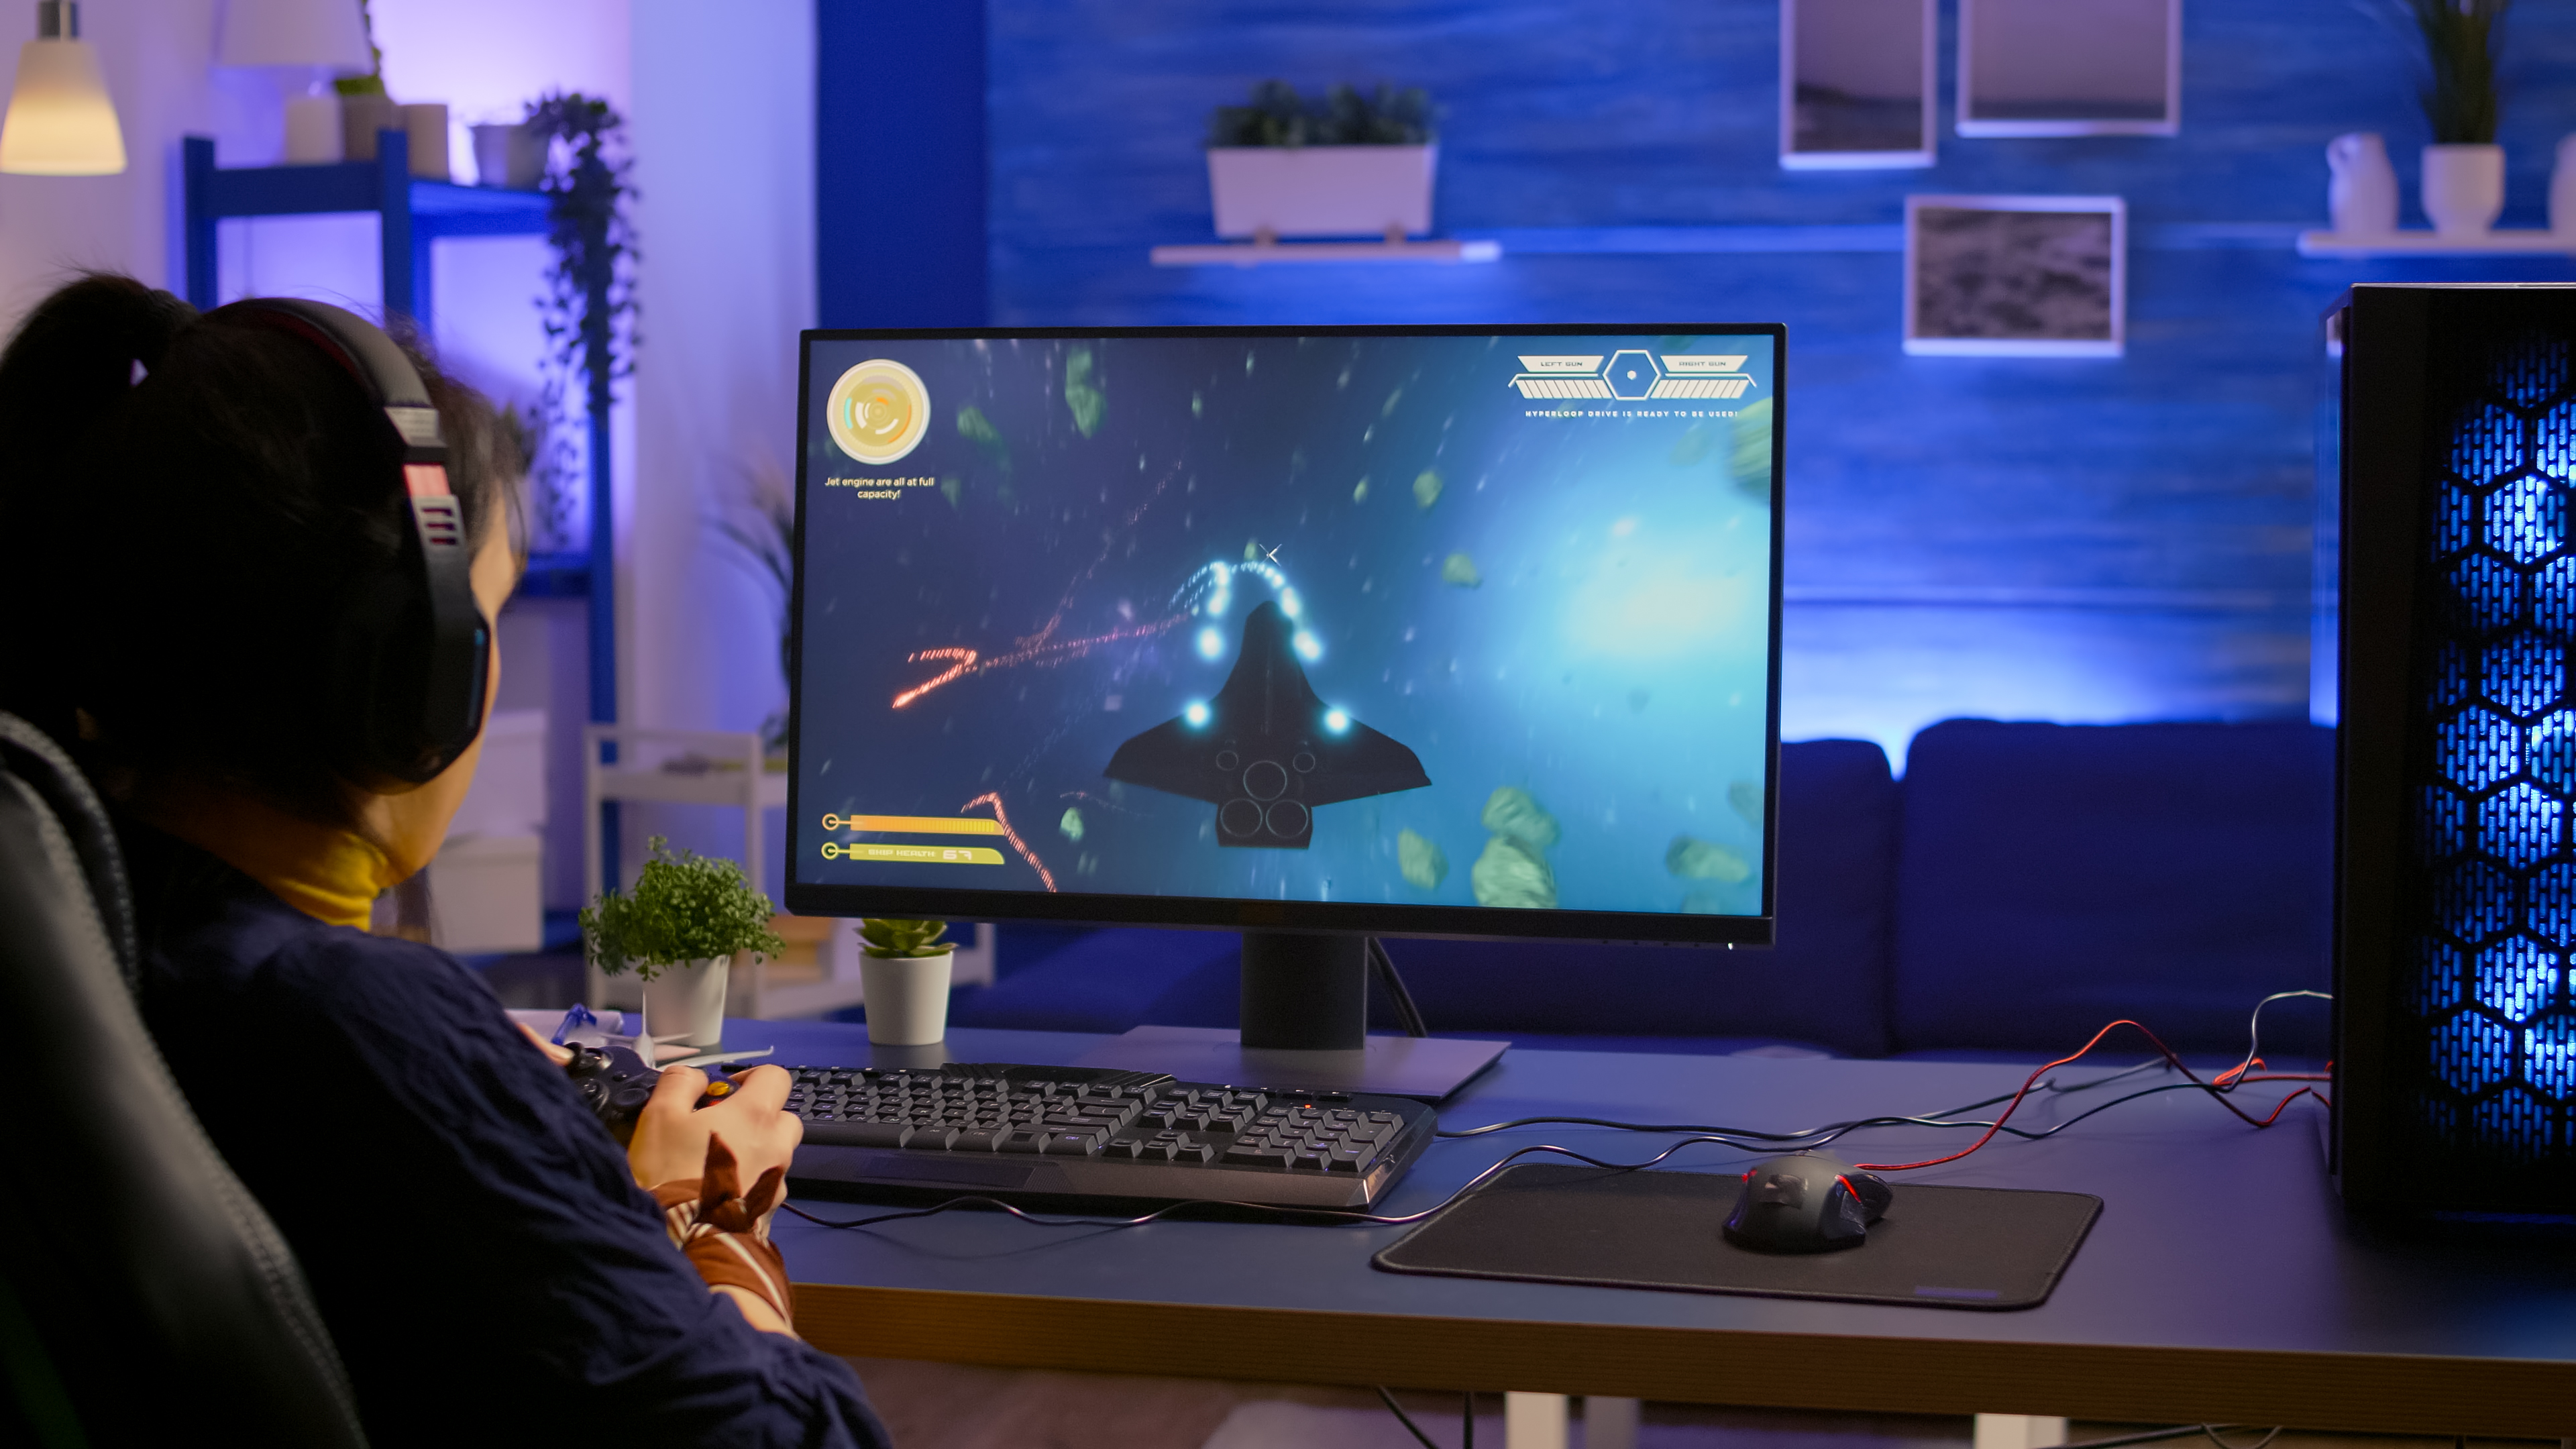 YOURLITE: What is the best LED light color for gaming?